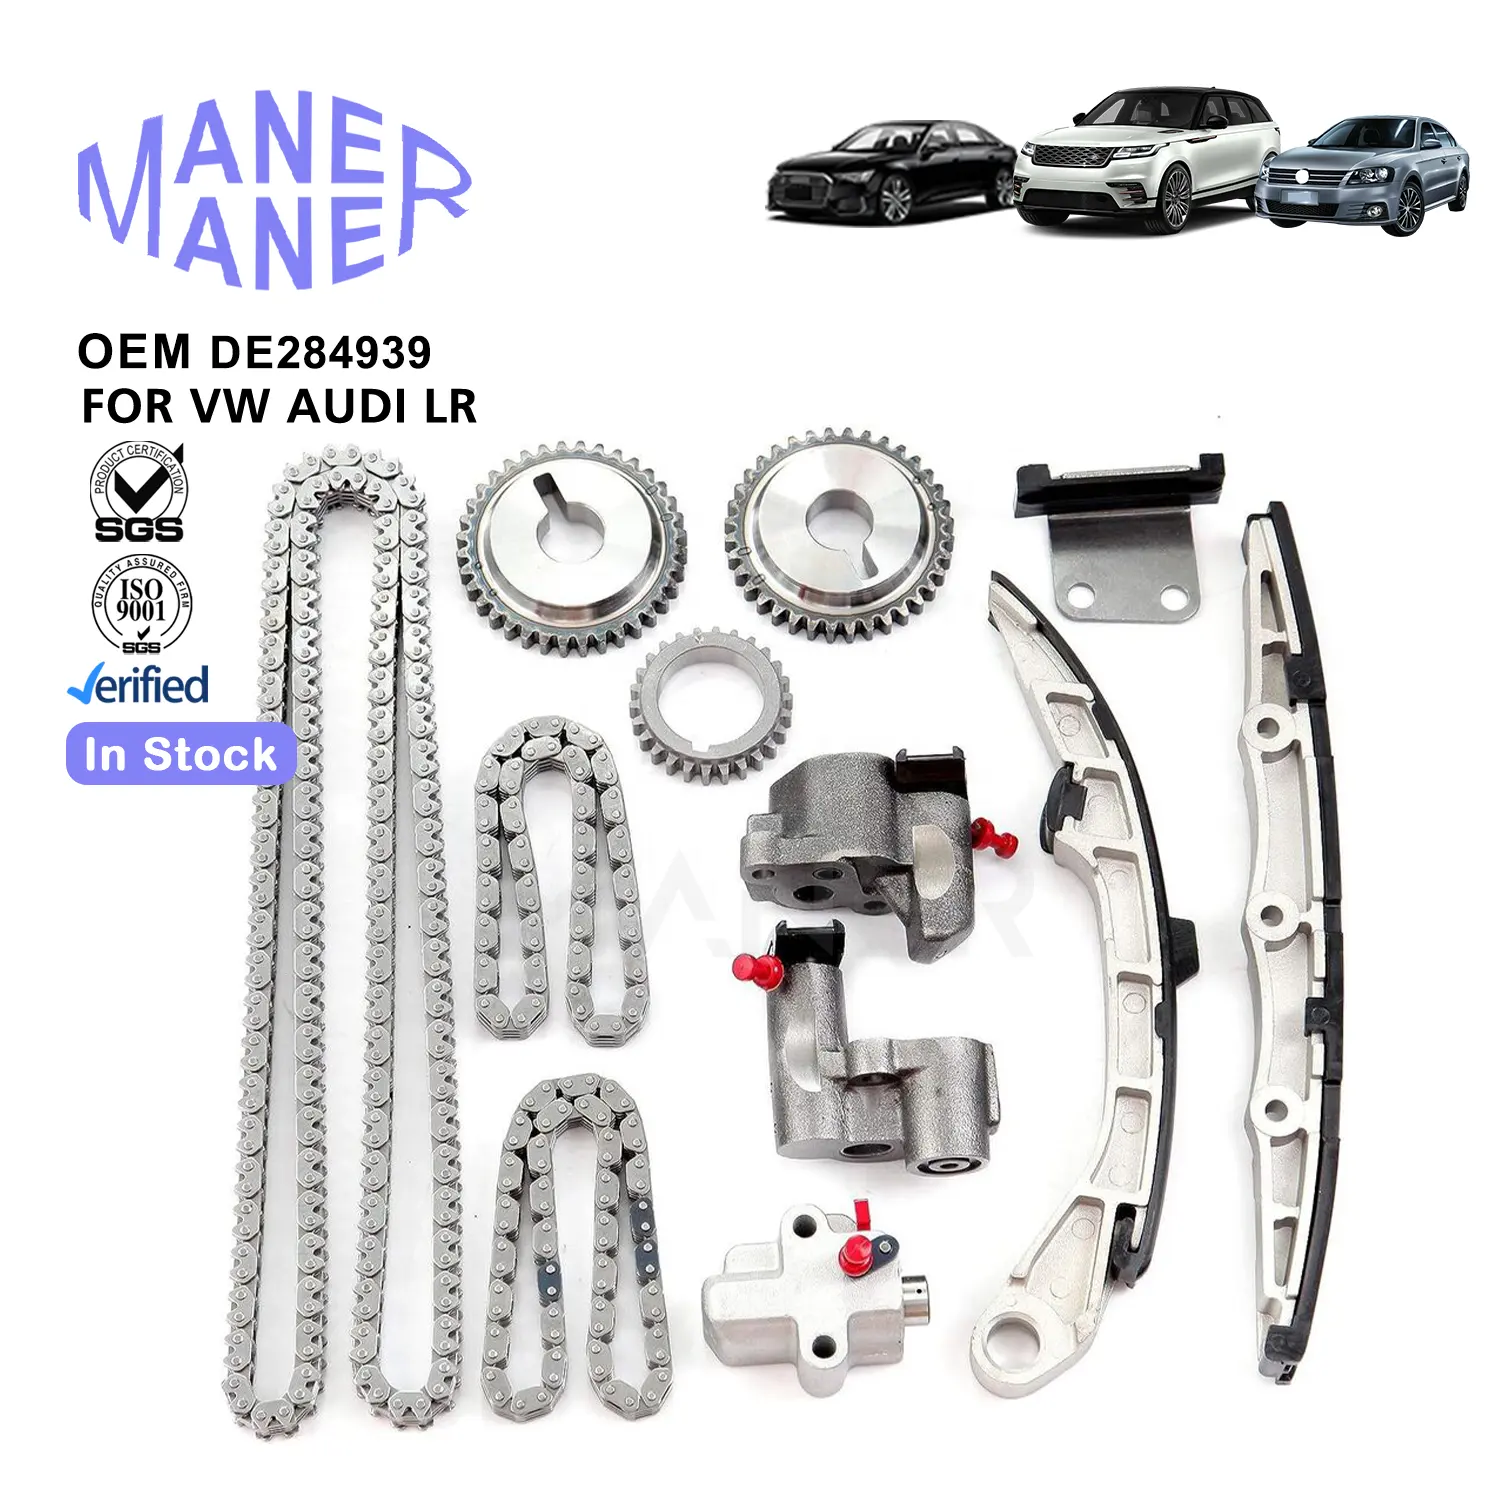 MANER Auto Engine Systems DE284939 manufacture well made Timing Chain Kit for Nissan car